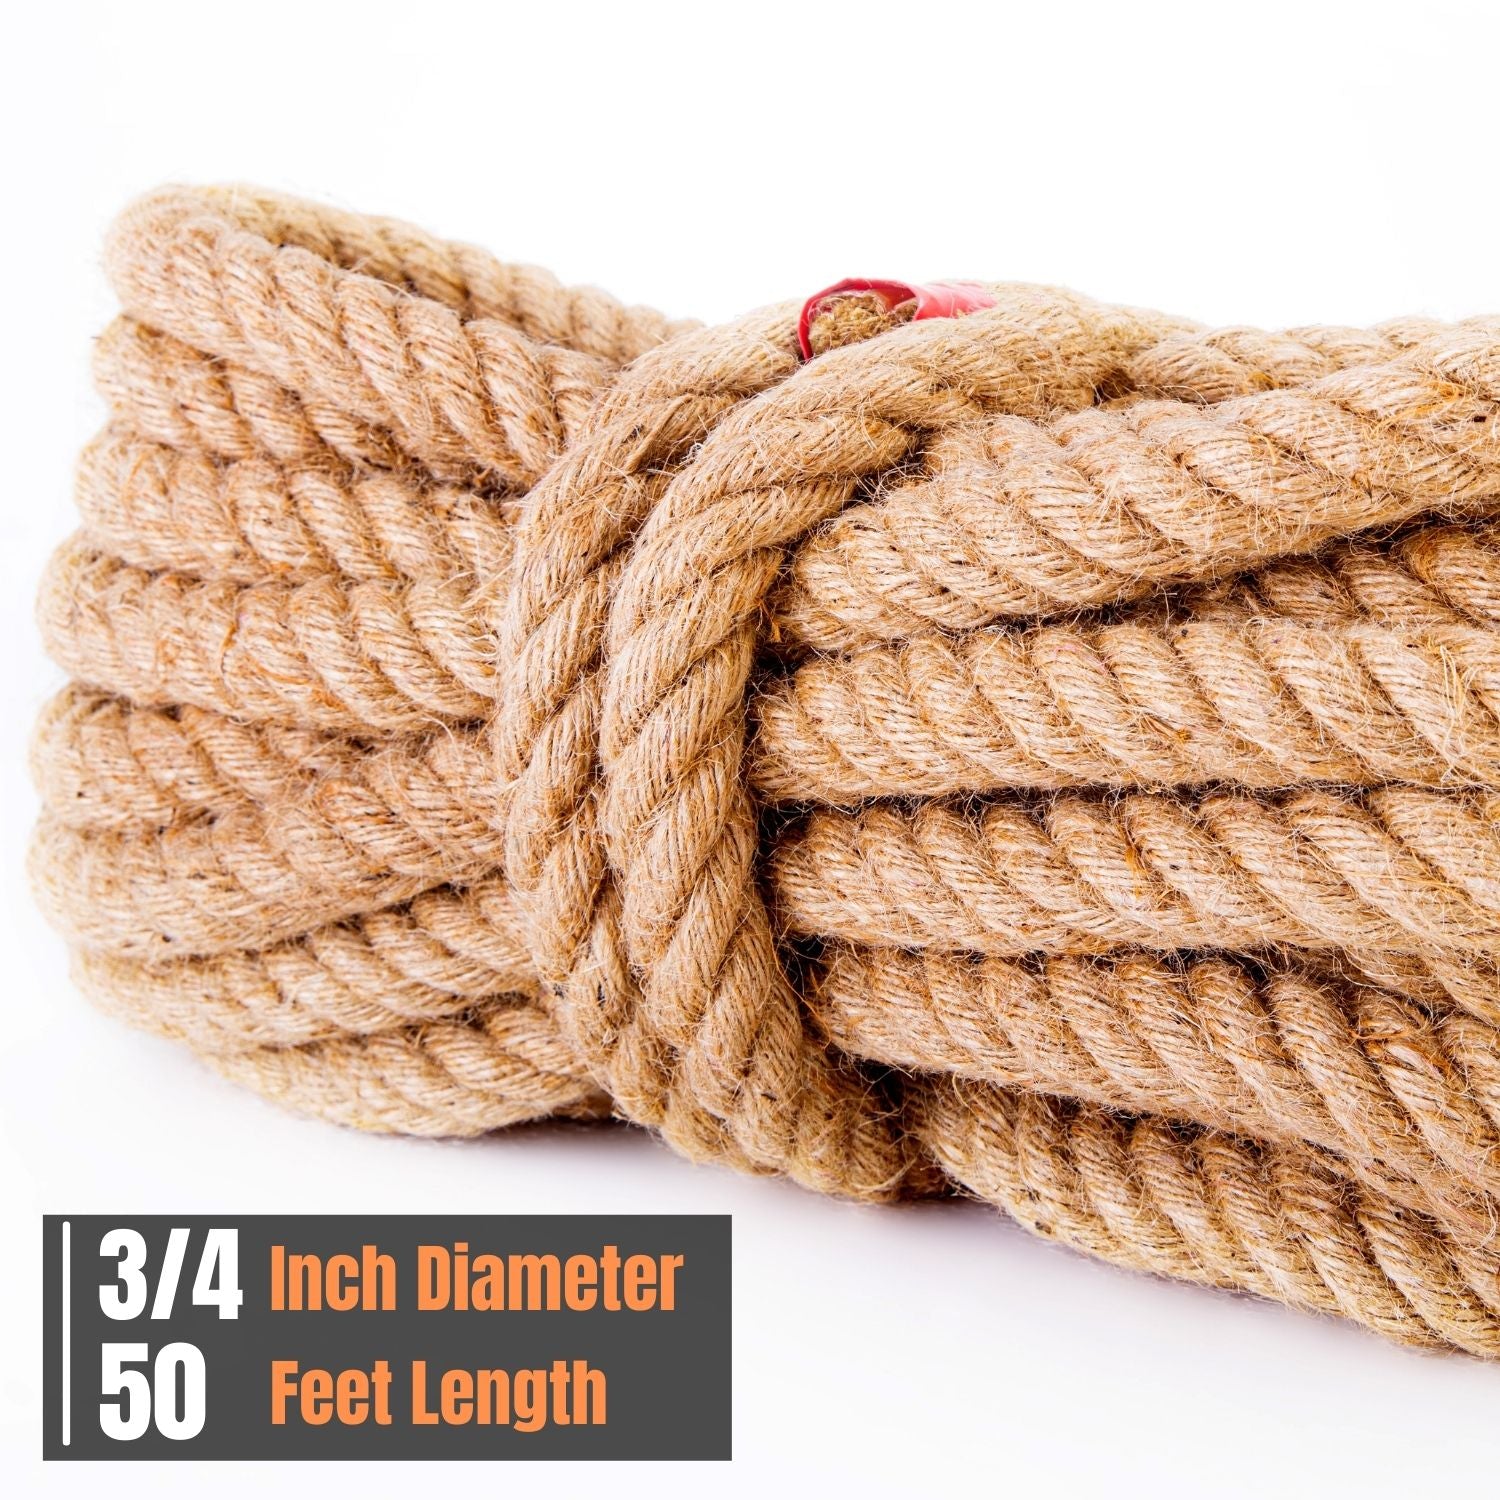  Twisted Cotton Rope (3/4 in x 50 ft) Natural Thick Rope for  Crafts, Railings, Hammock, Decorating (Brown) : Tools & Home Improvement